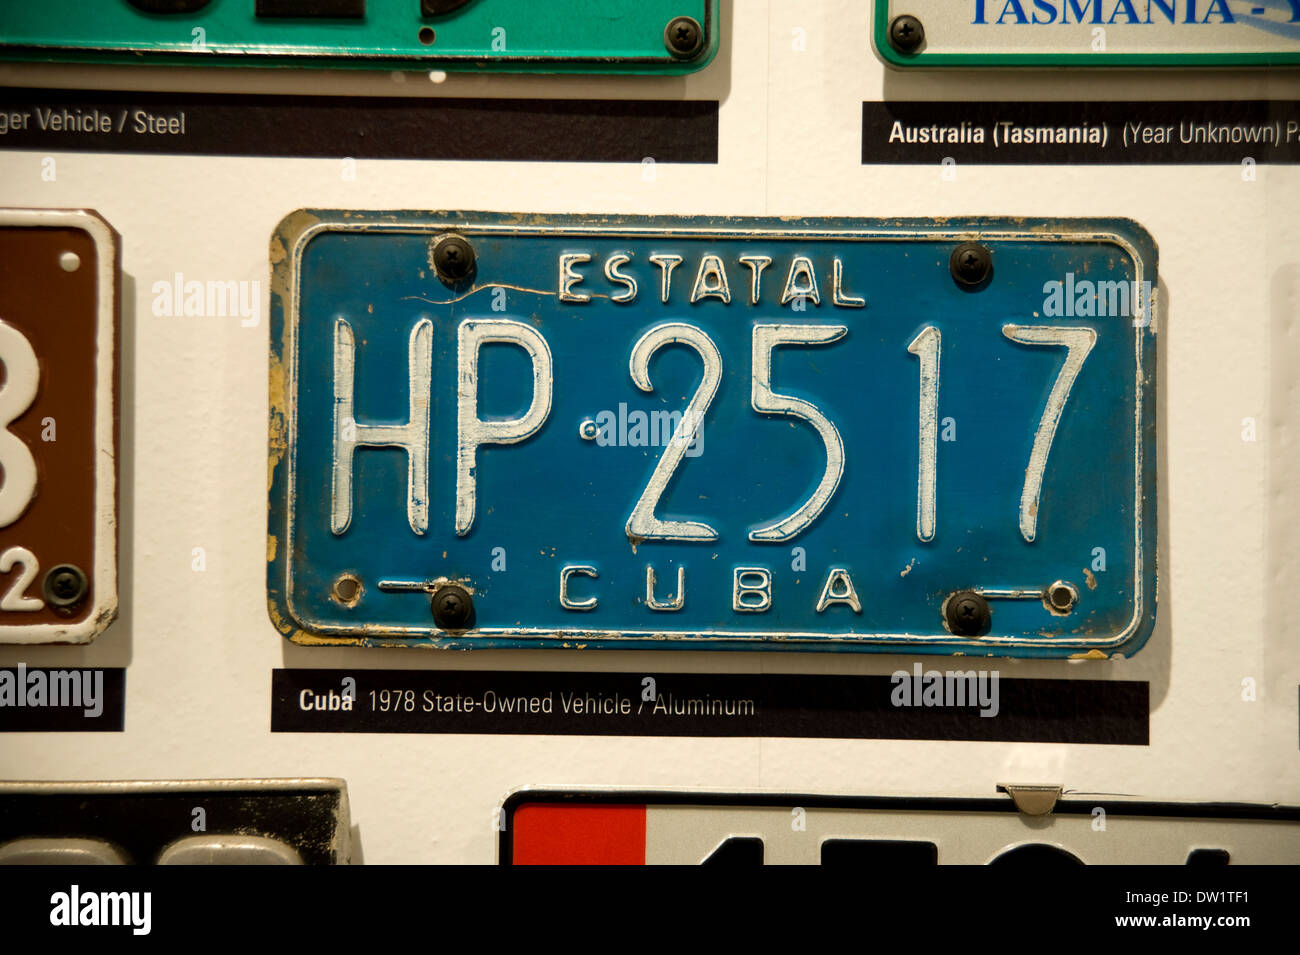 Cuban license plate on Display at the Petersen Automotive Museum in Los Angeles Stock Photo